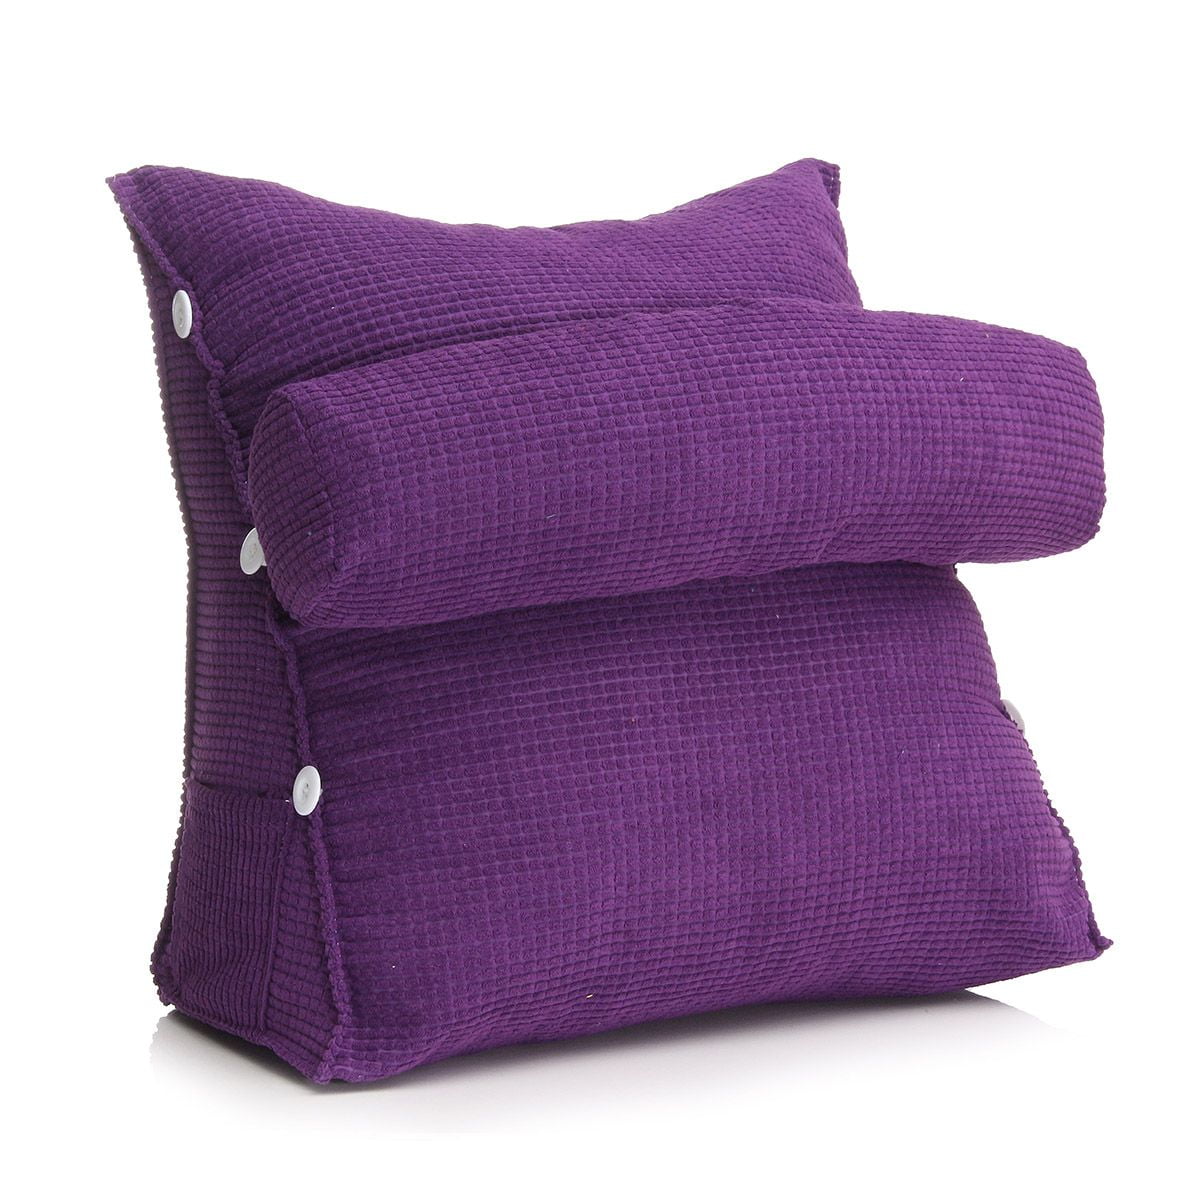 Simple Bed Chair Pillow Walmart Canada for Living room